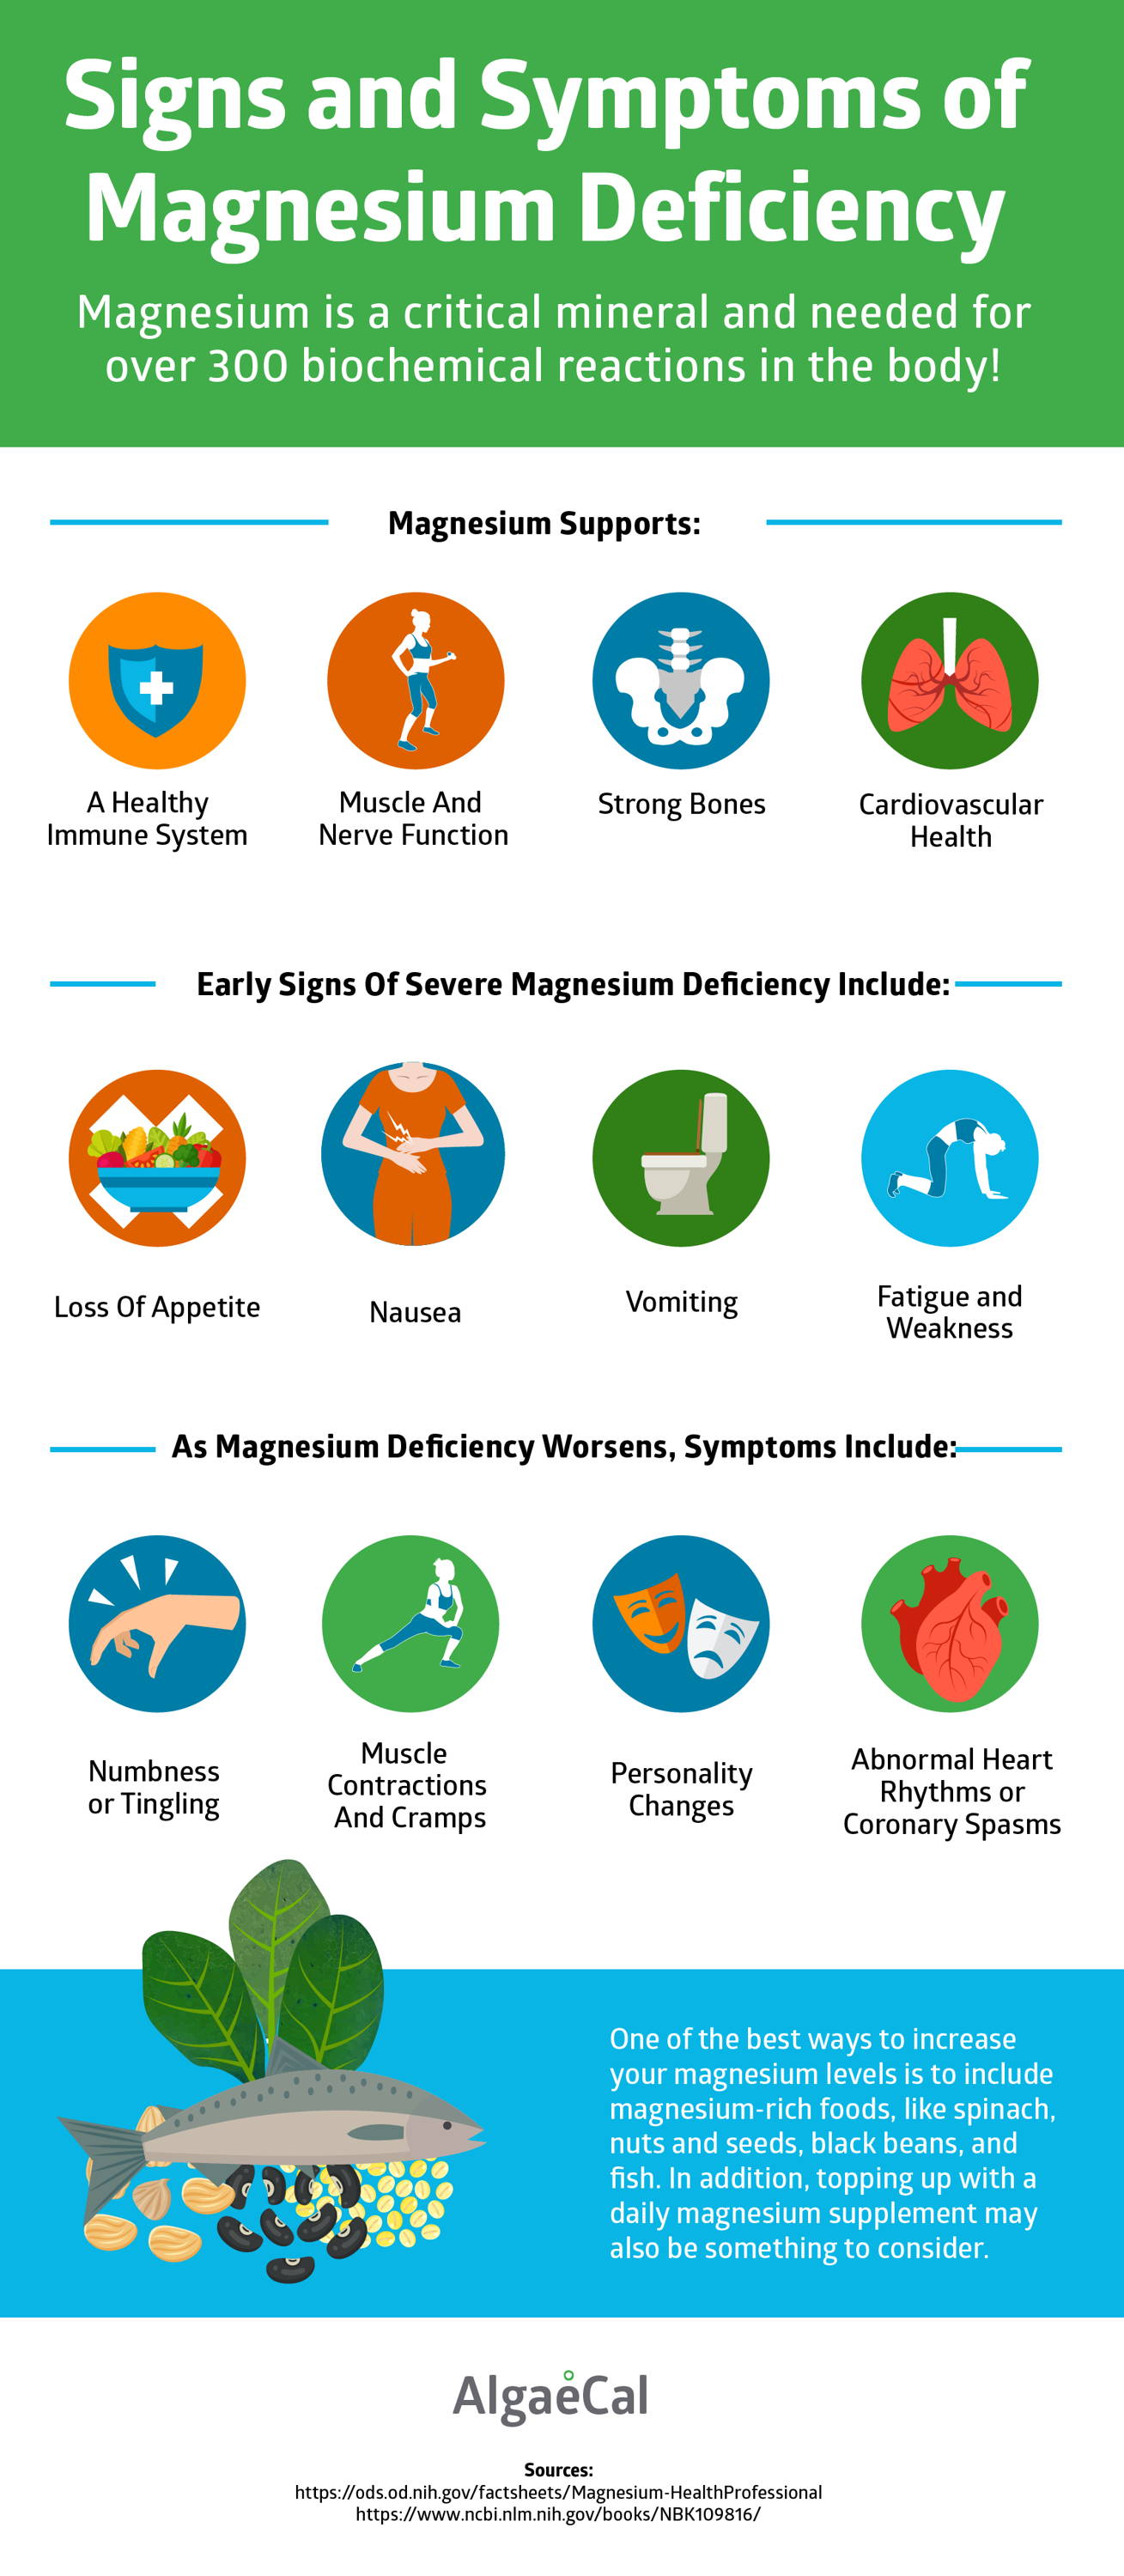 Signs and symptoms of magnesium deficiency infographic